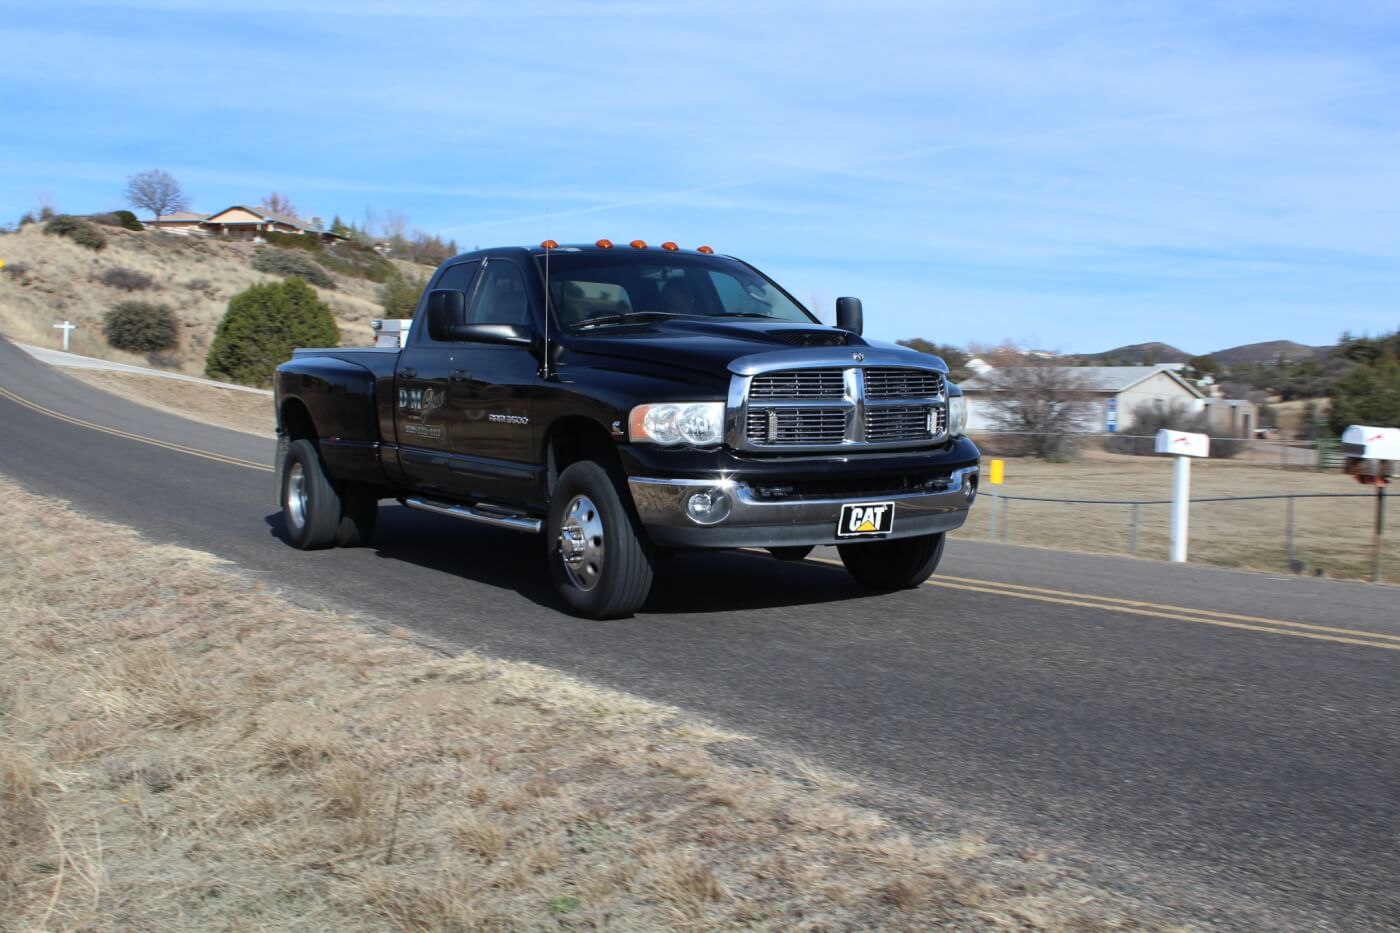 1. The subject of our clutch upgrade was a 2005 Ram 3500 4x4 dually. The owner of the truck uses it to haul equipment for his glass company, so the truck gets used hard and rarely moves without a trailer attached to it and heavy stuff in the bed. It also has some mild performance upgrades. The truck was having some shifting problems that gradually got worse. The owner wisely chose to take the truck to H&H Diesel Performance in Dewey, Arizona, one of the better-known diesel shops in the region. H&H handled the diagnosis and wrenching duties for this article.